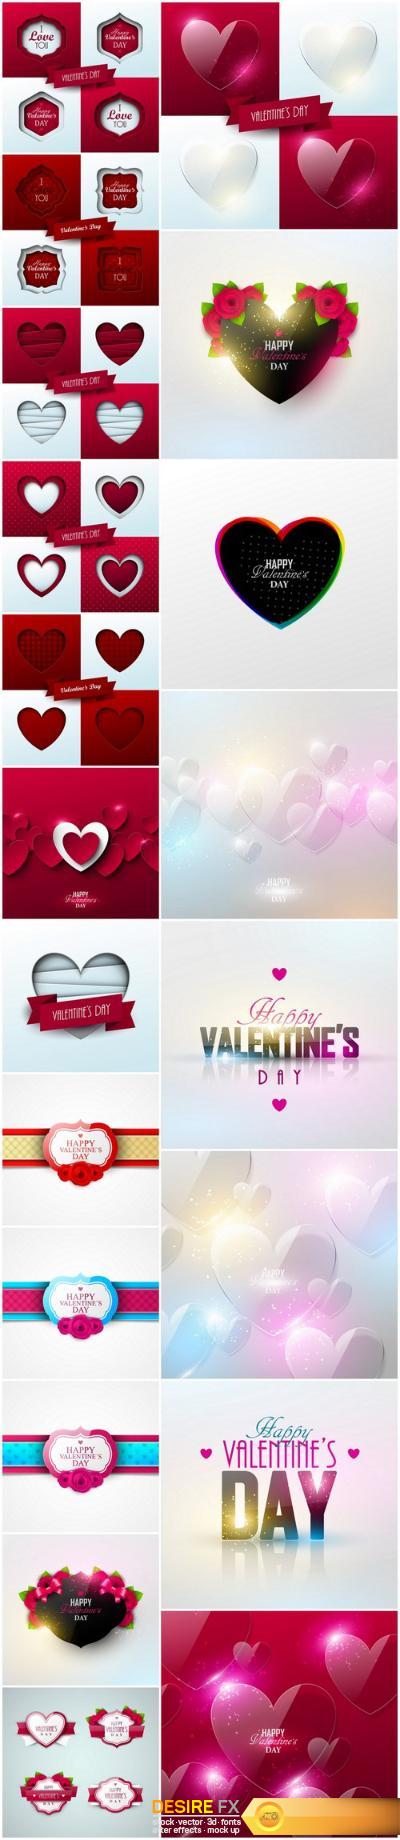 Heart & Love - Happy Valentines Day - Set of 20xEPS Professional Vector Stock